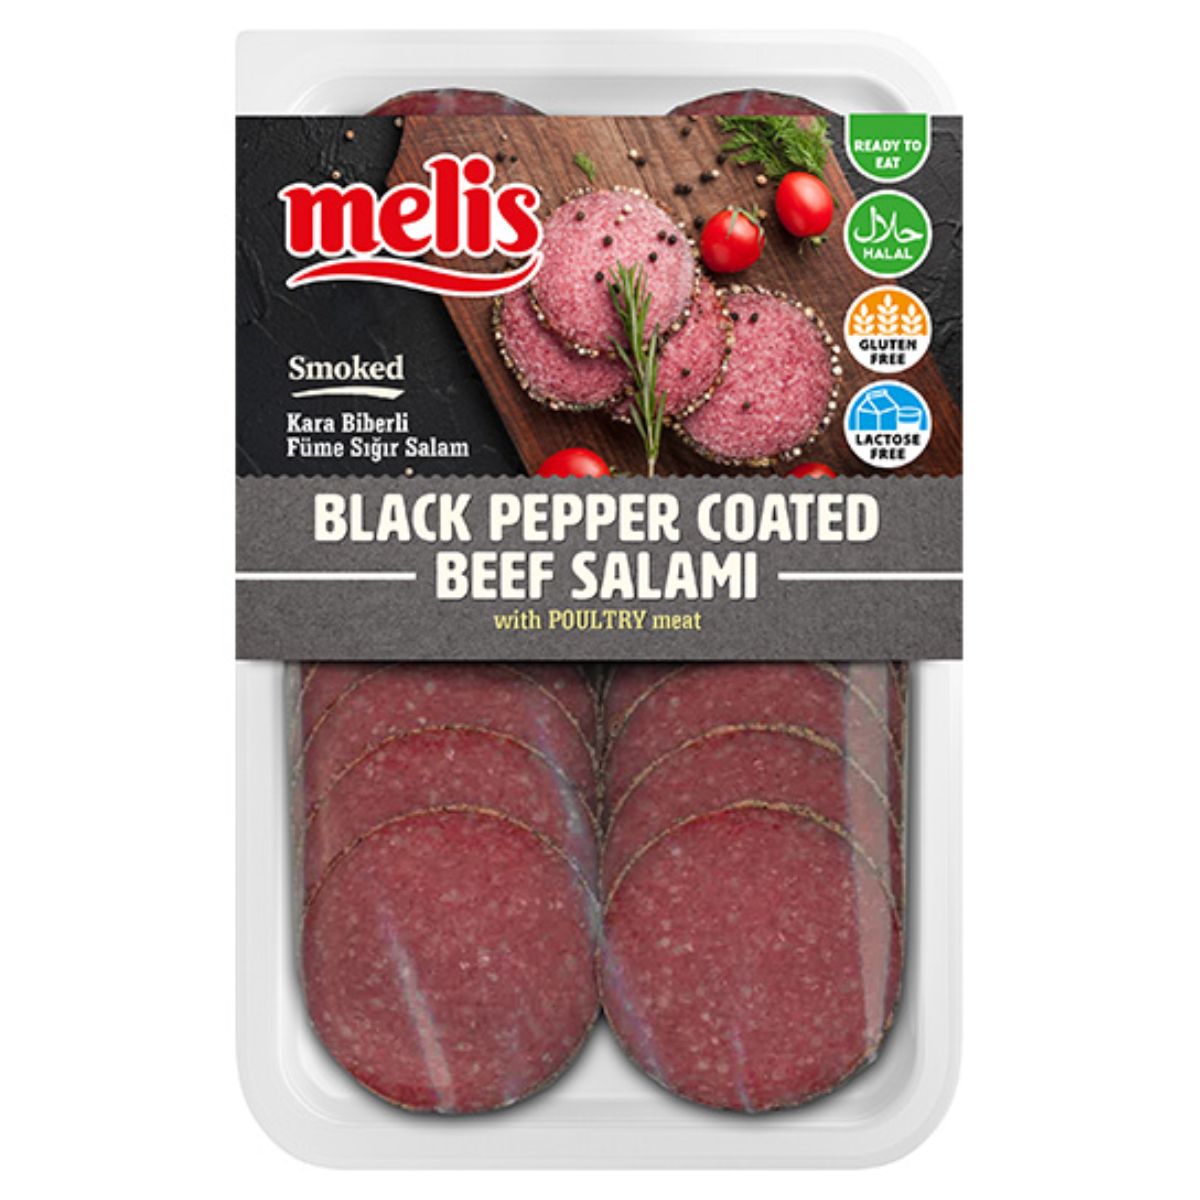 Melis - Coated & Smoked Poultry Meat & Black Pepper Beef Salami - 80g